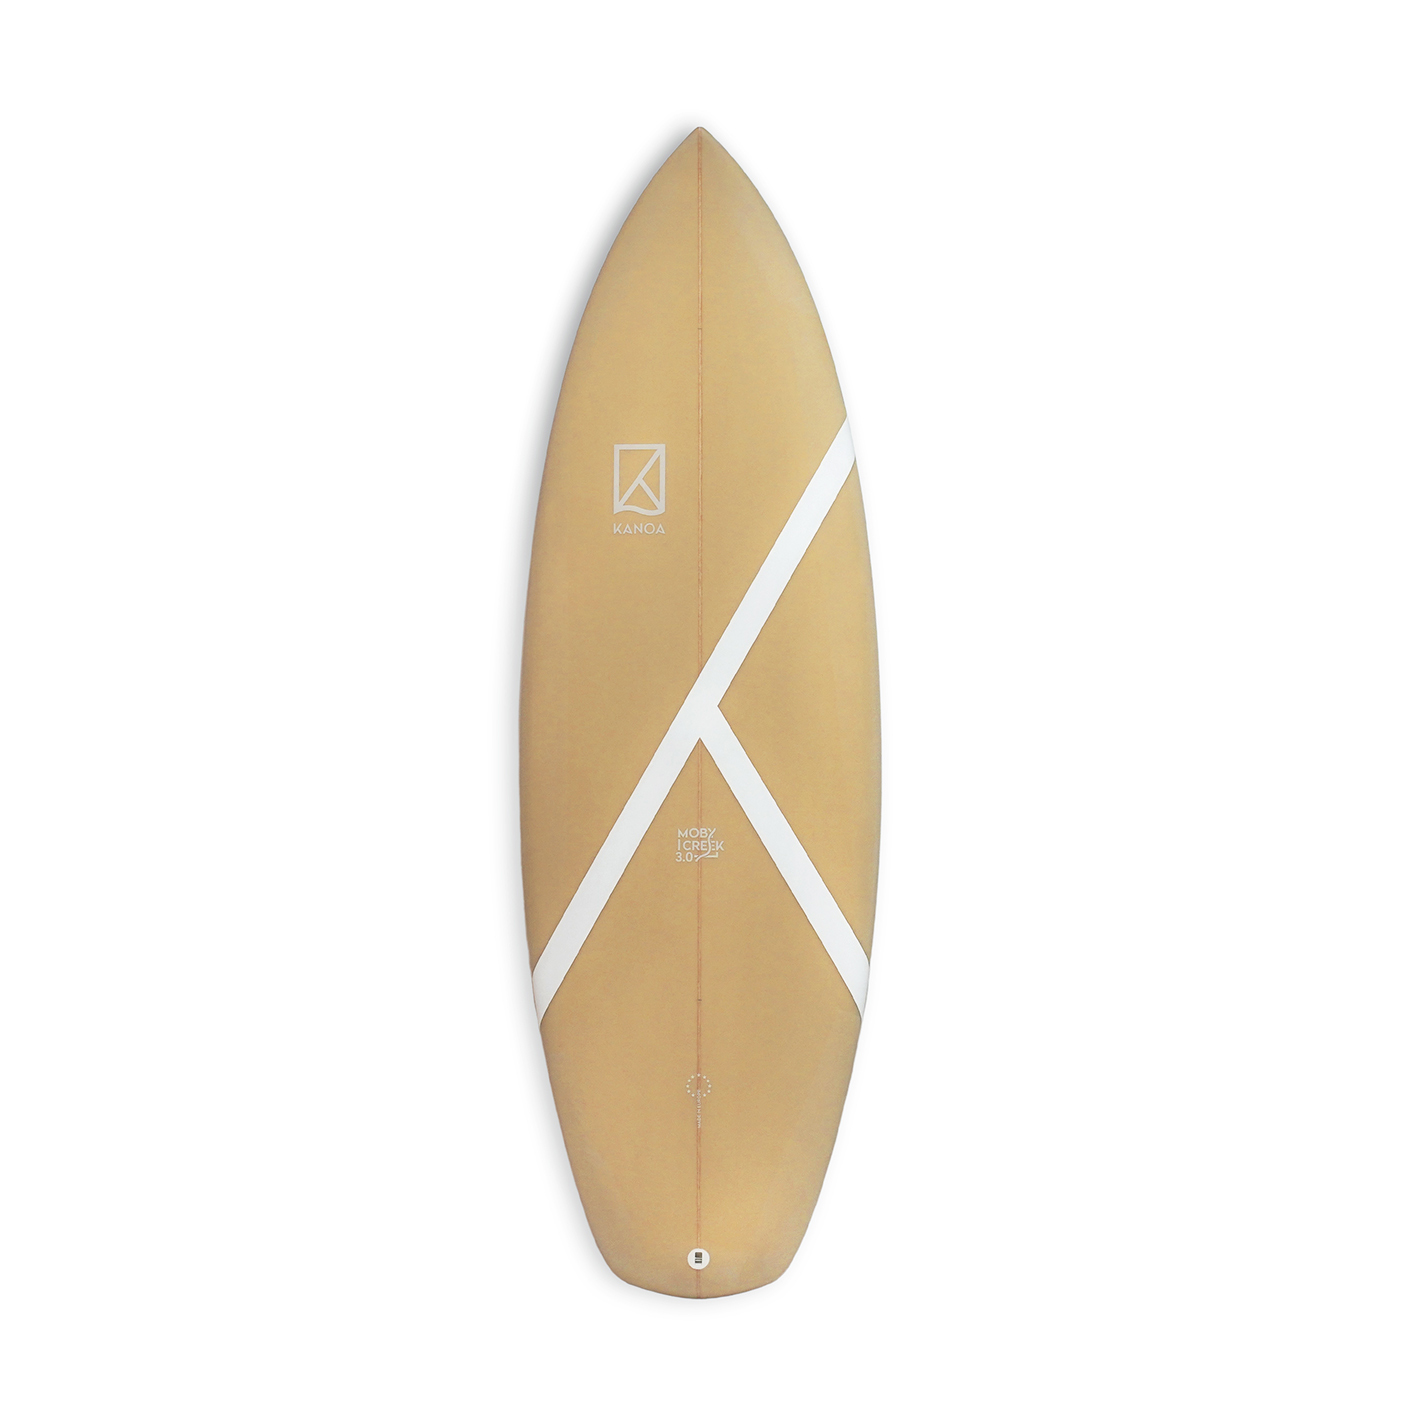 Sustainable and eco-friendly High-Performance Riverboard Surfboard with Polyola Eco Foam